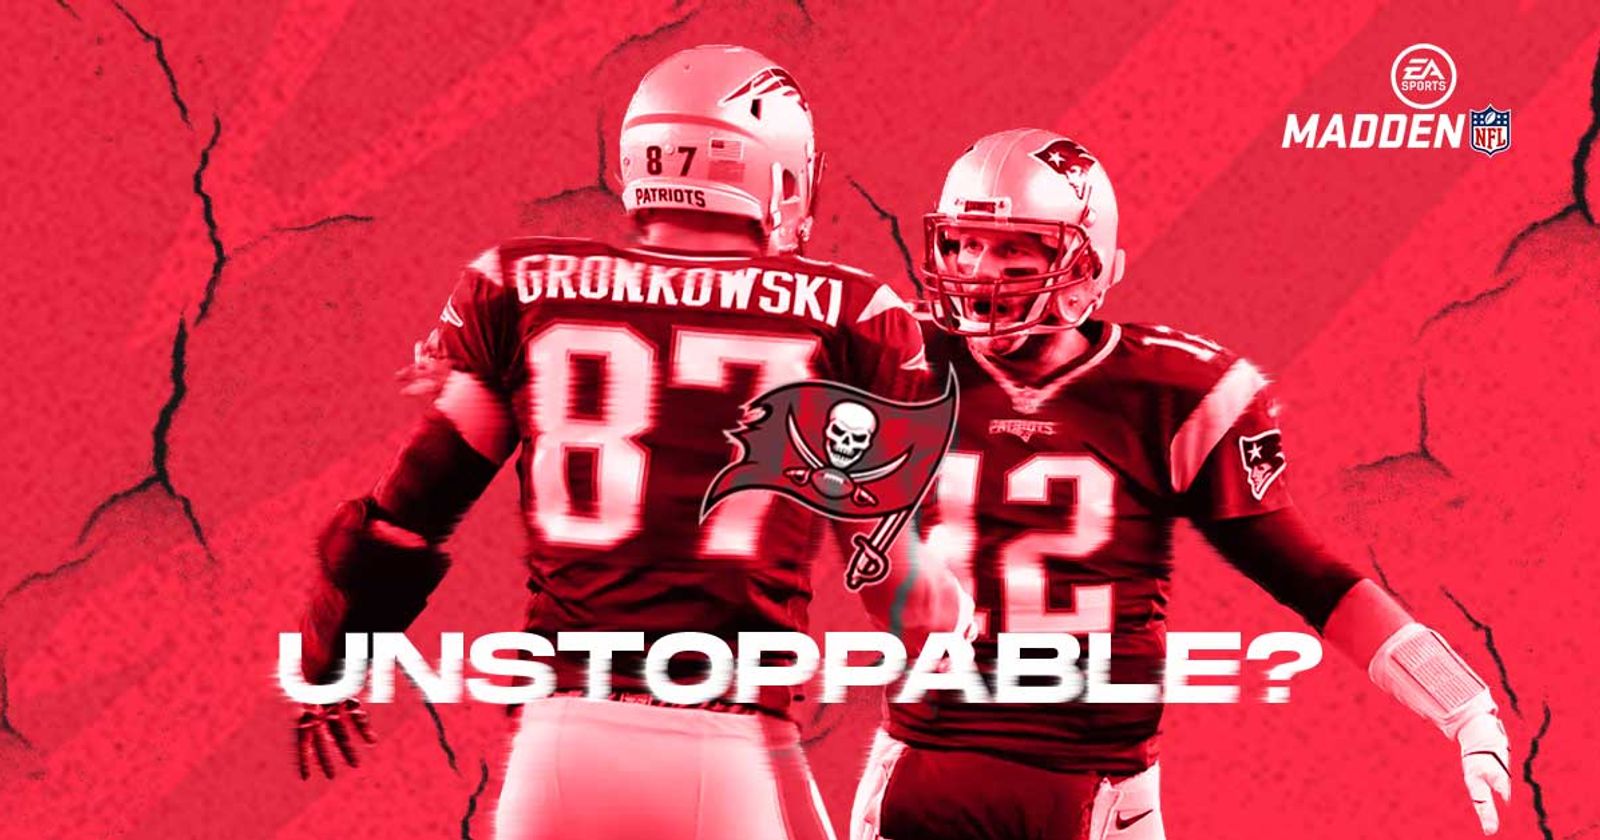 Madden 21: Tom Brady & Rob Gronkowski could make Tampa Bay unstoppable